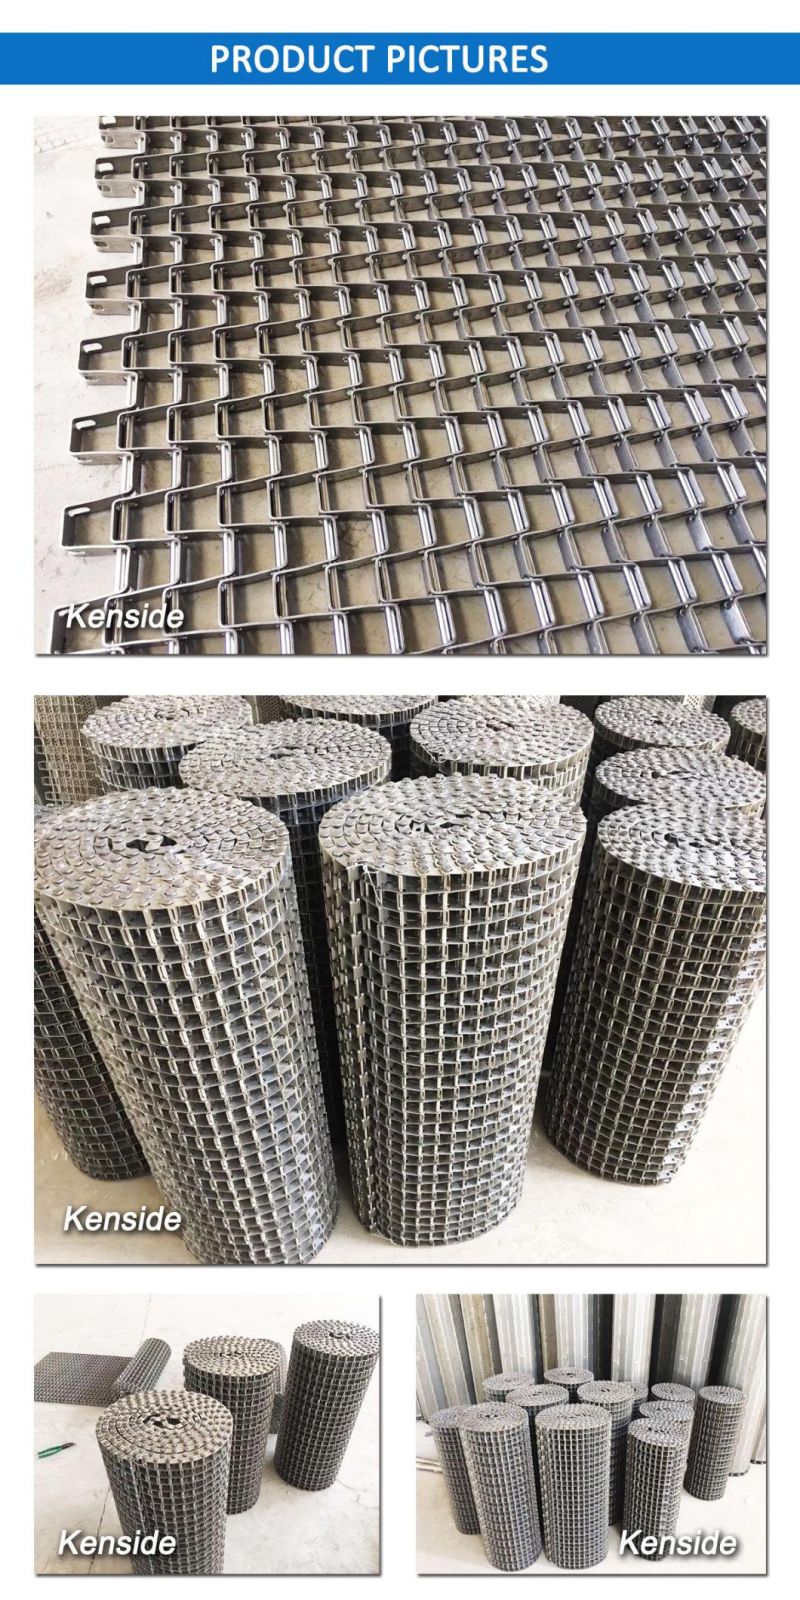 Stainless Steel Honeycomb Wire Mesh Belt